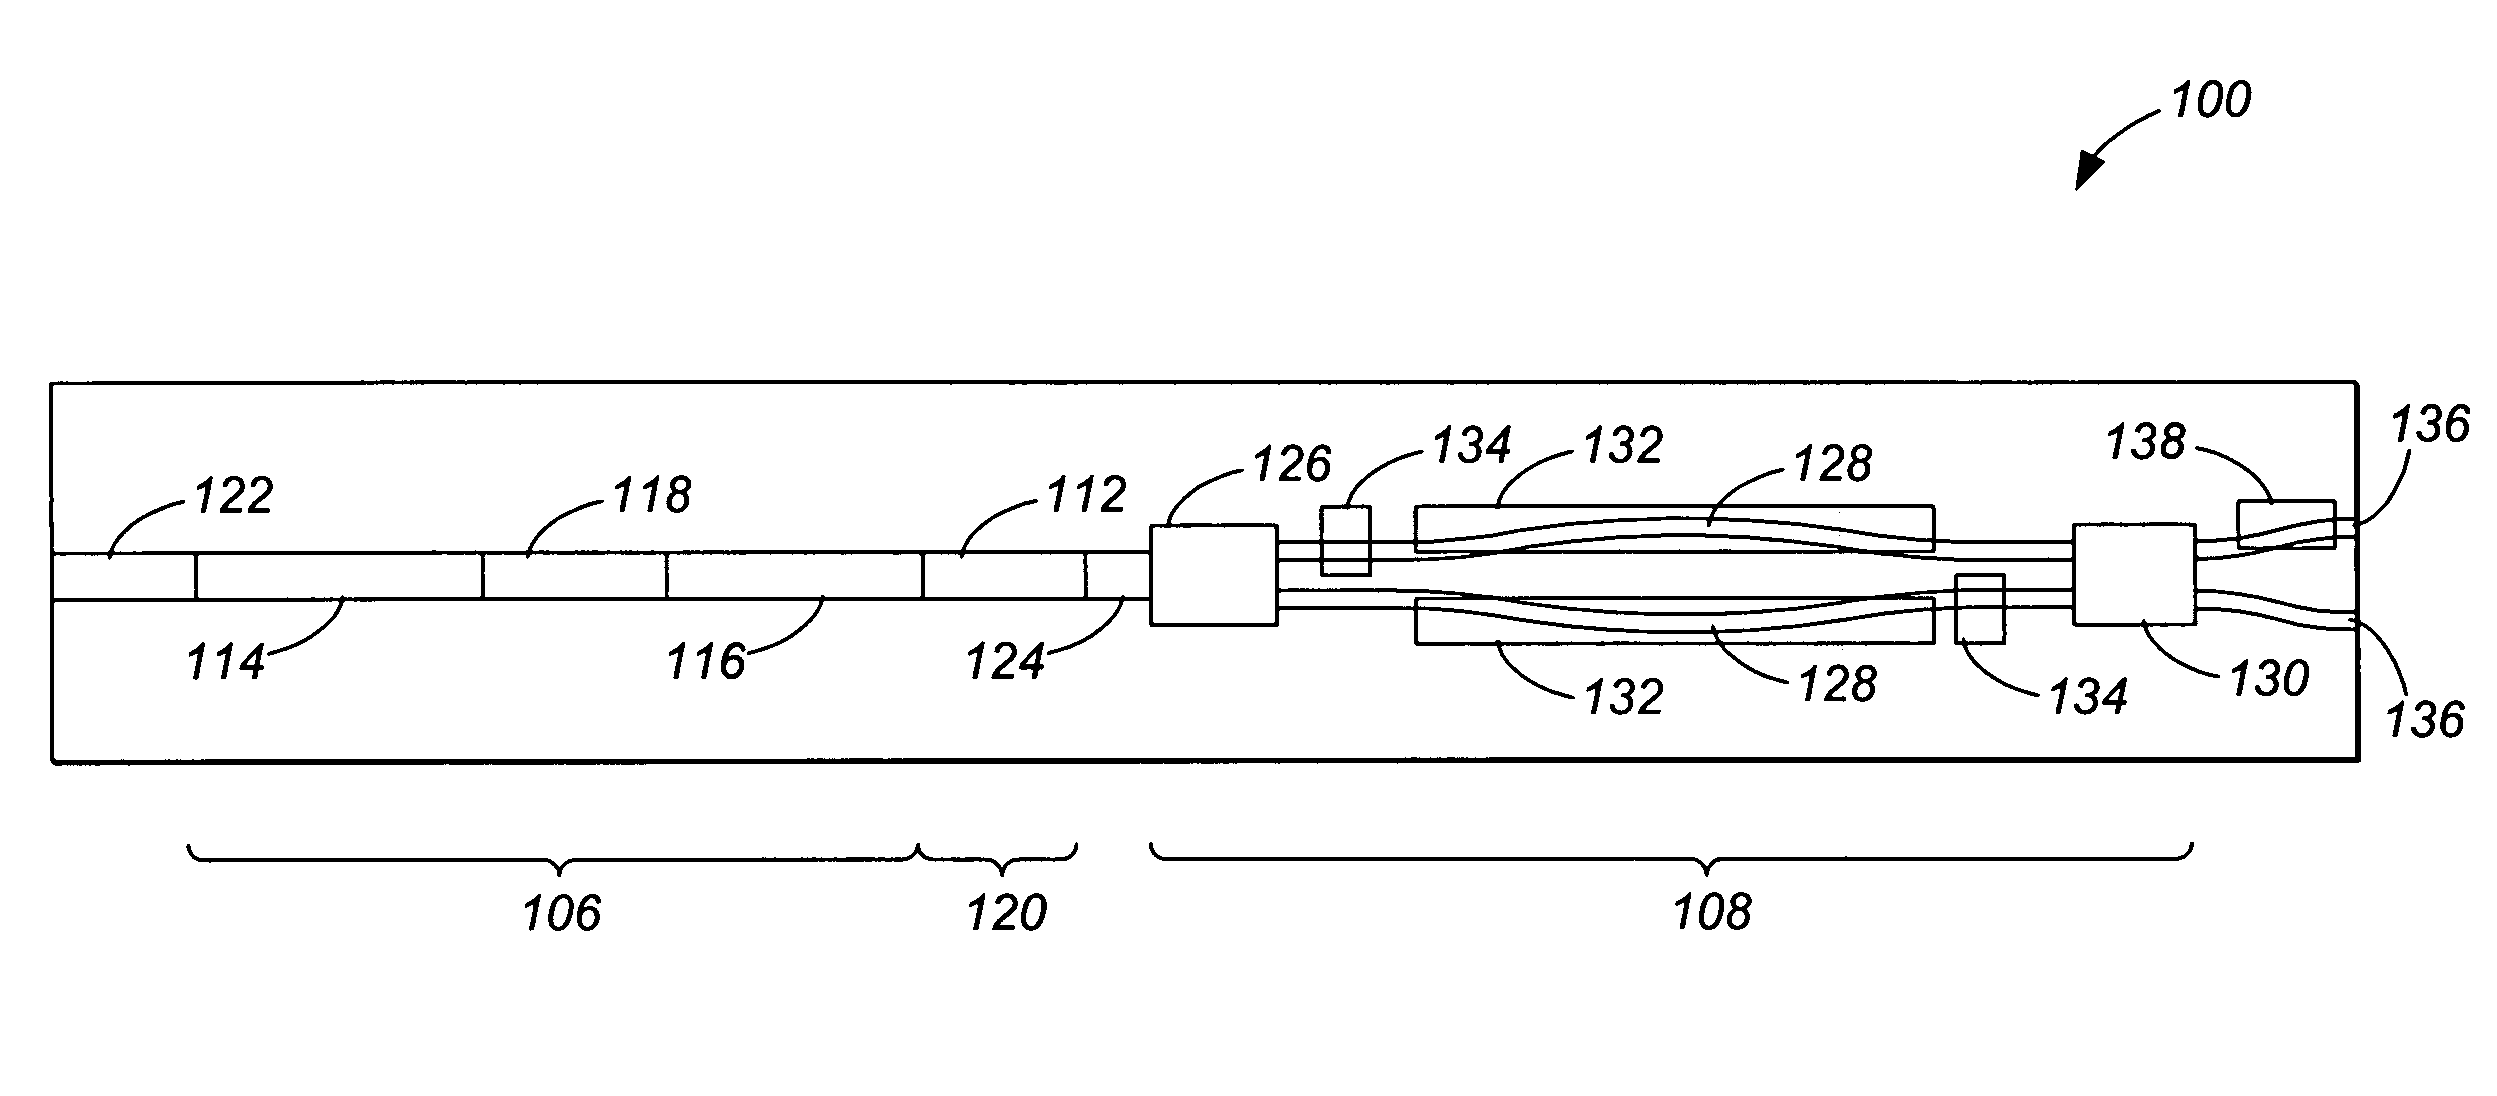 Tunable laser source with monolithically integrated interferometric optical modulator